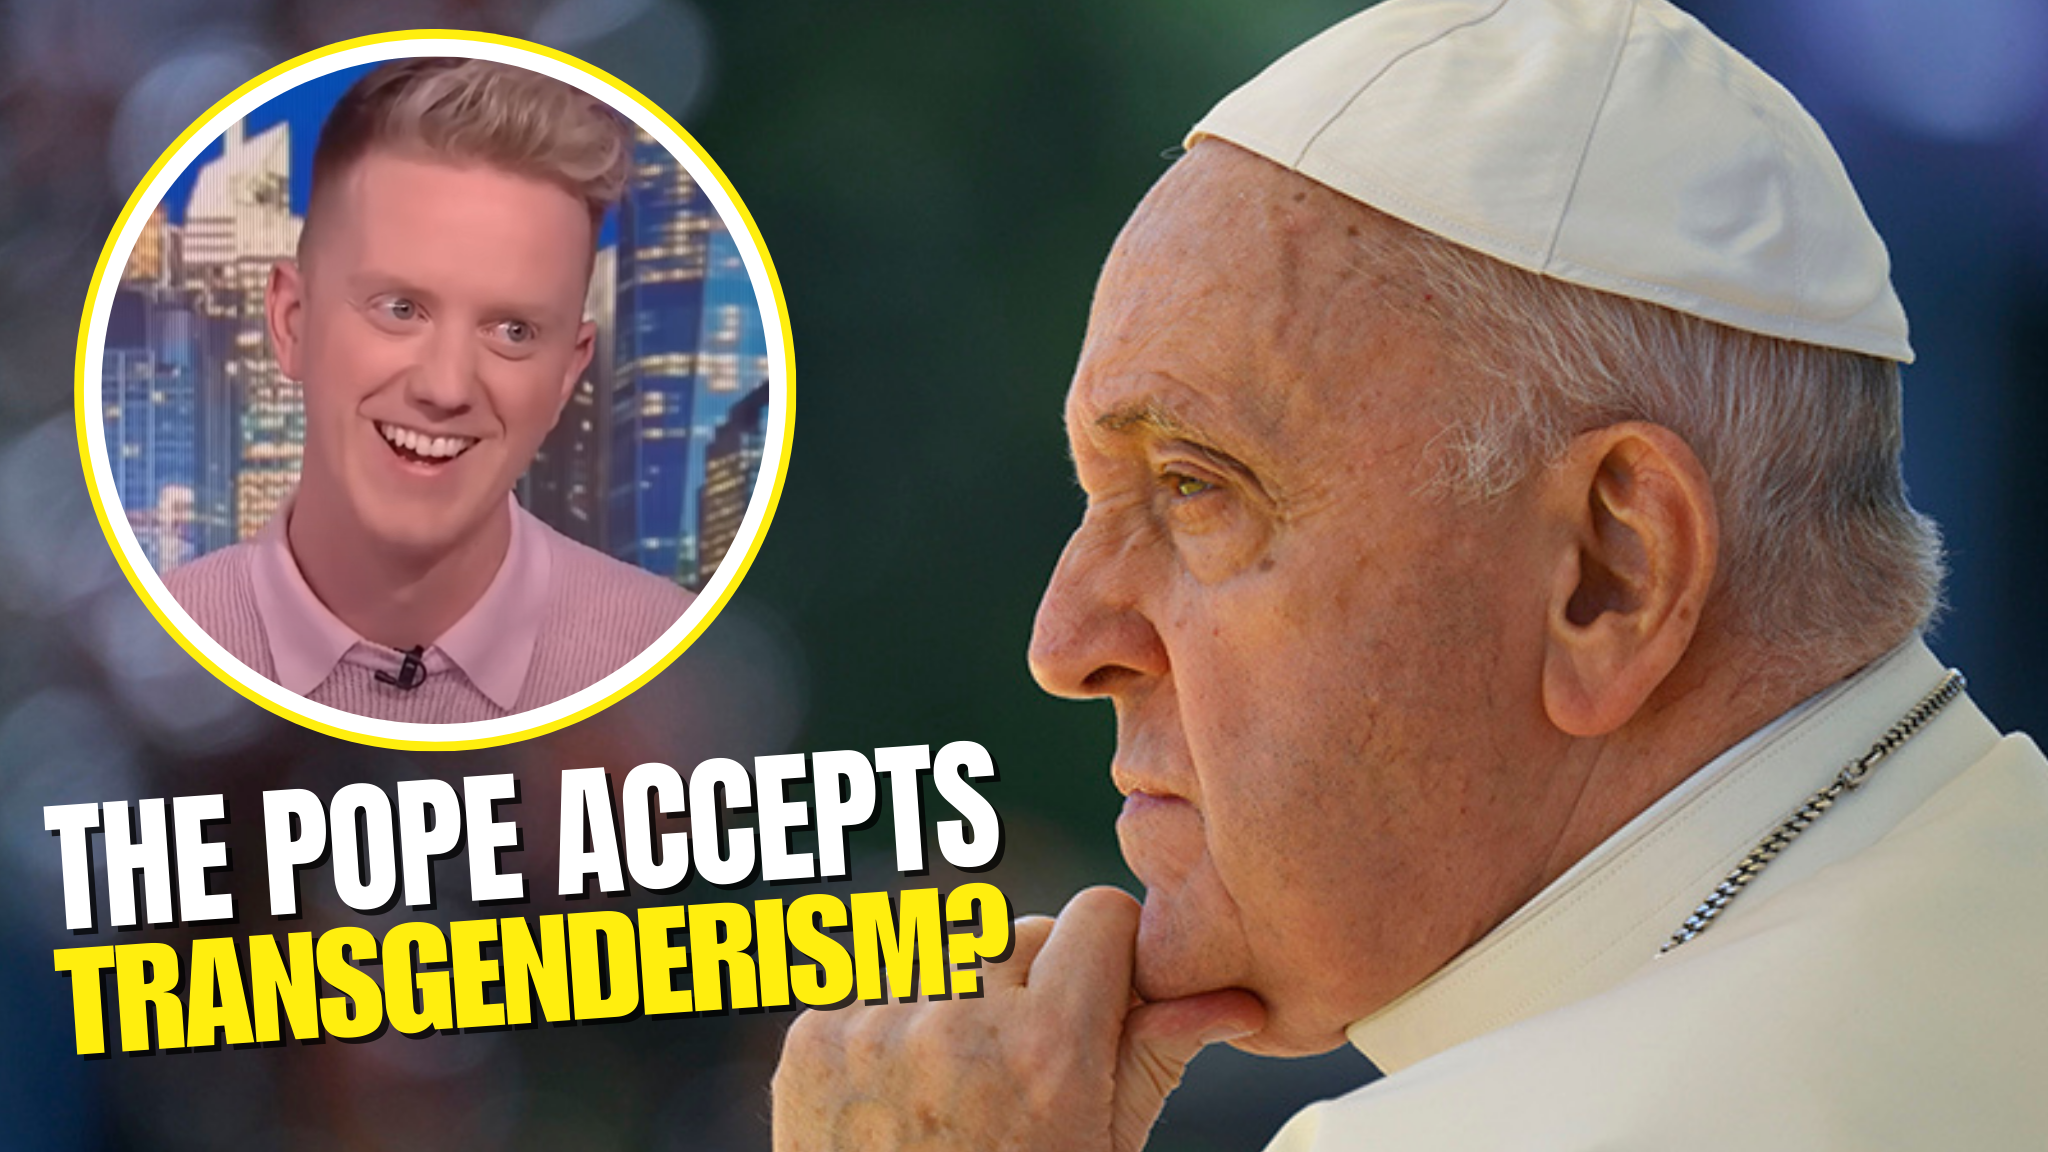 Ghay Comedian Claims Pope Francis Accepts Tran$genderi$m